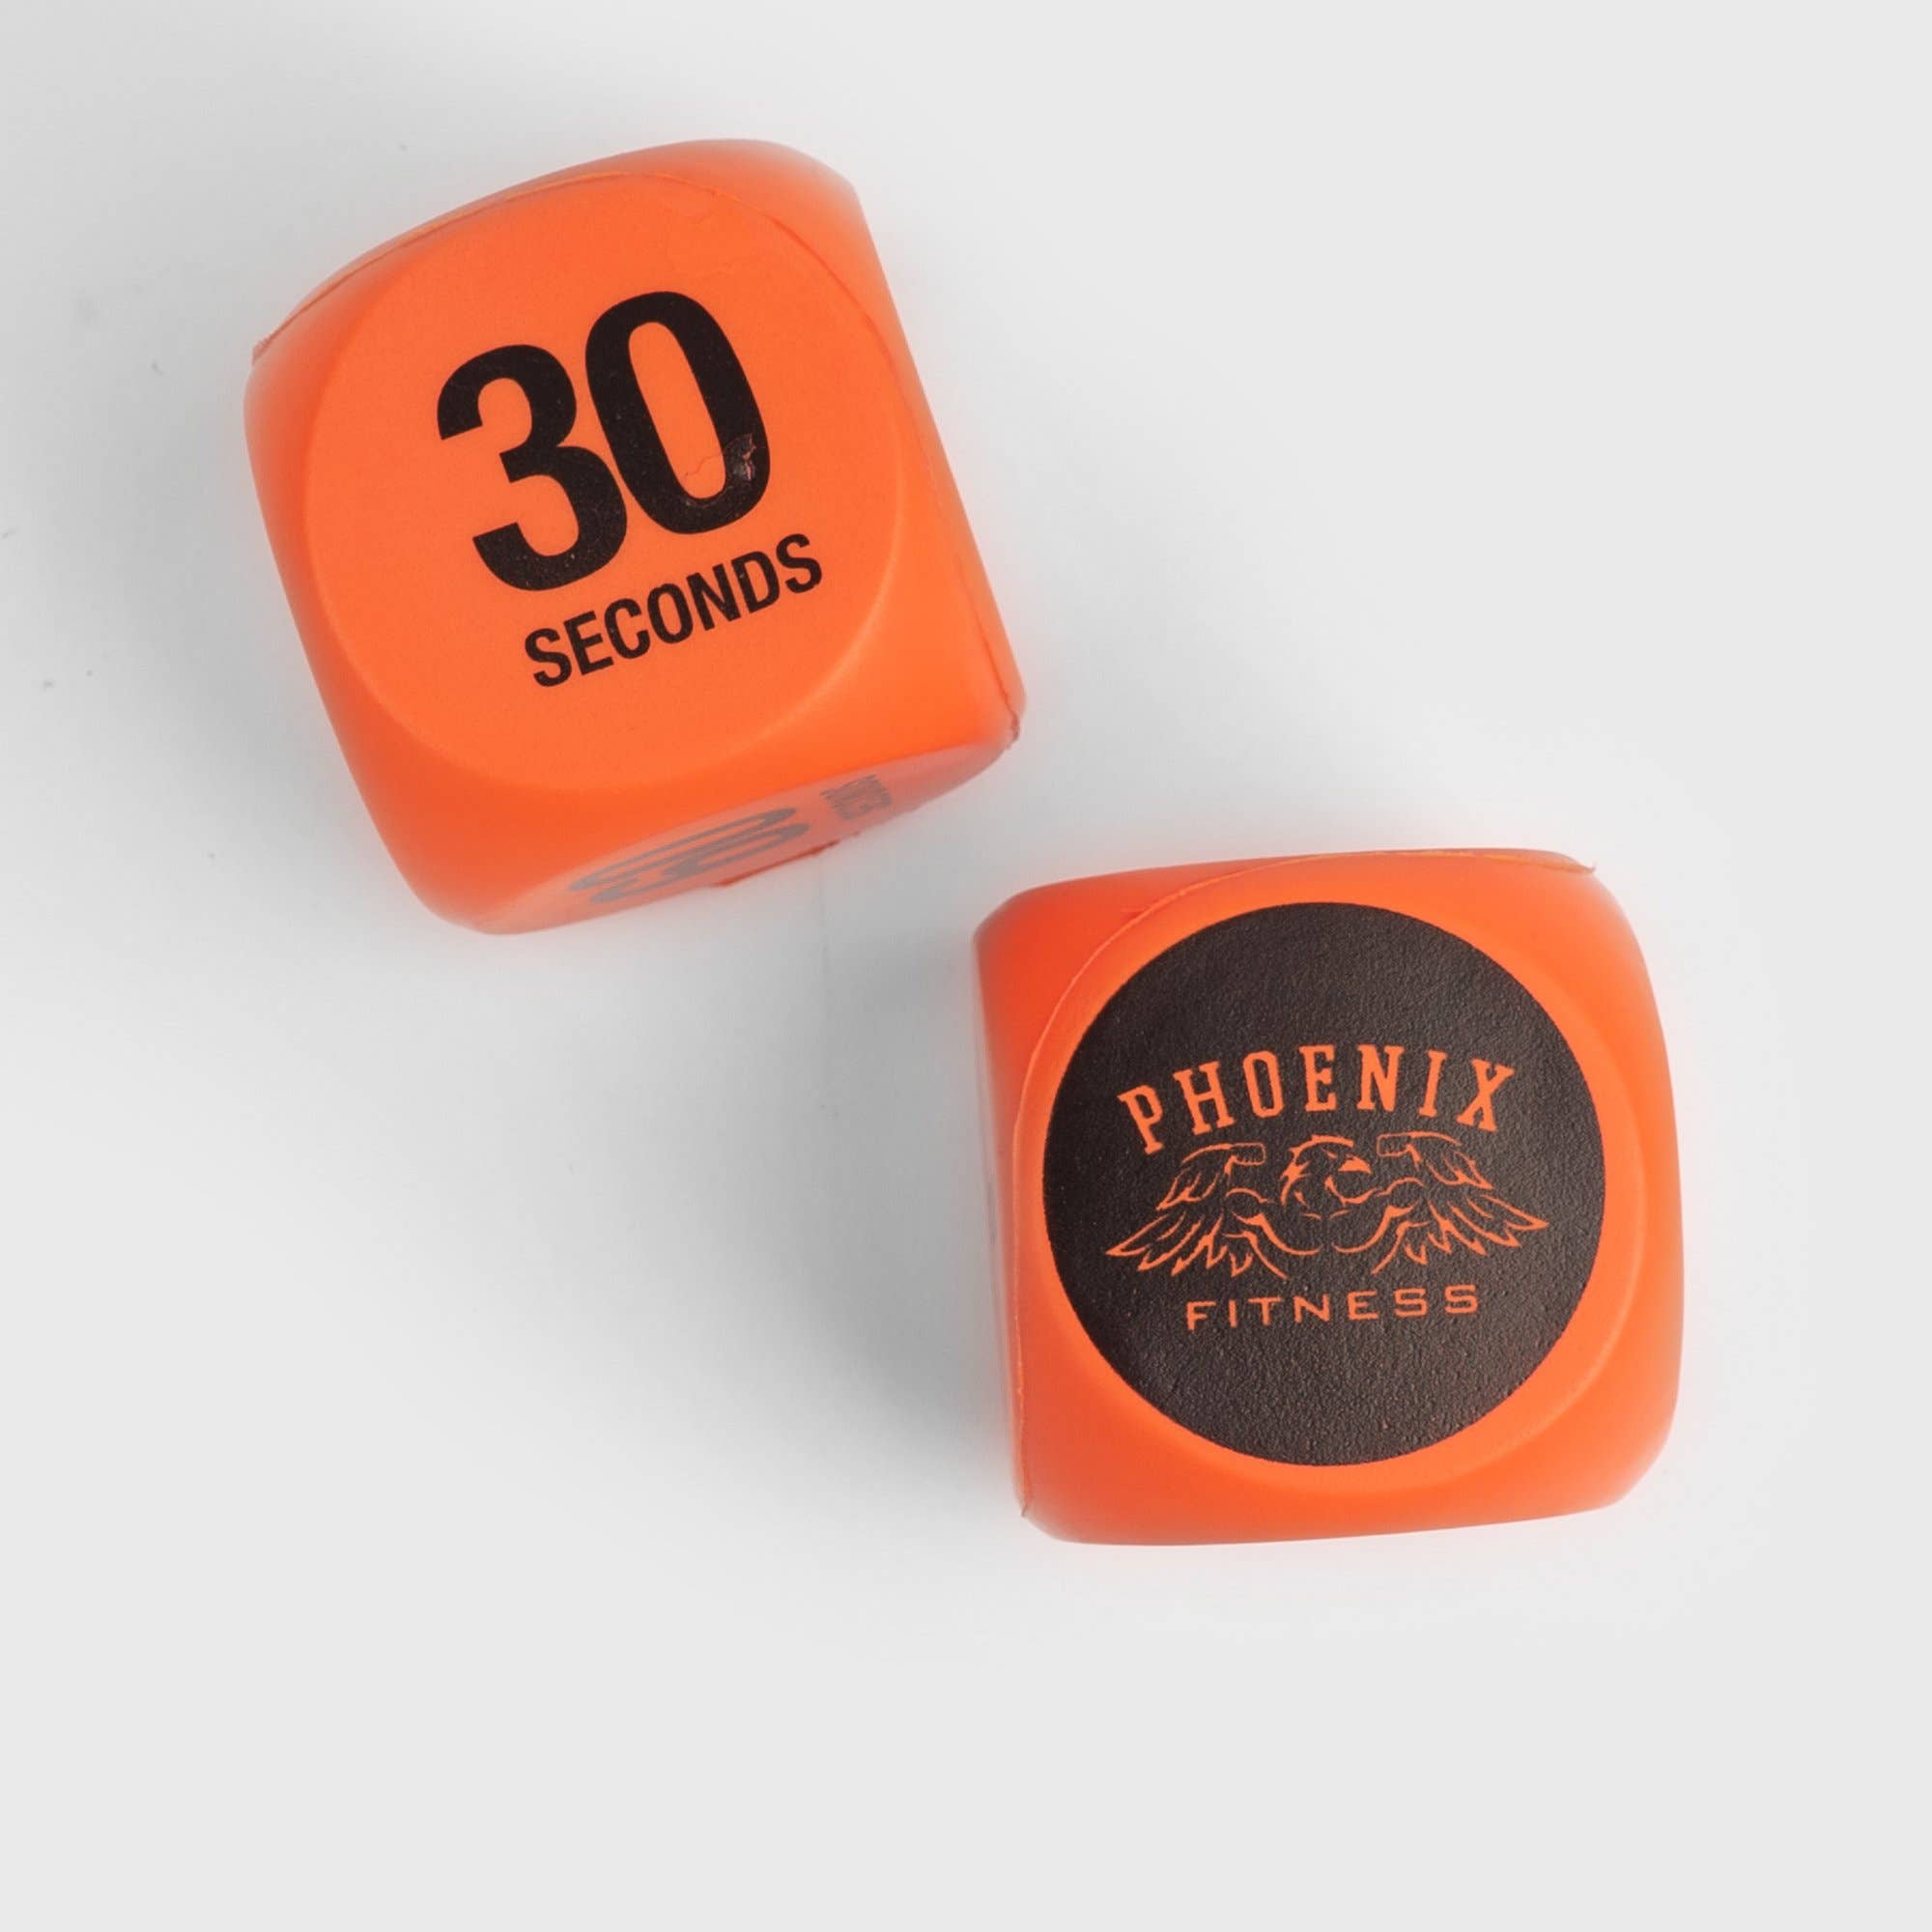 Fitness Routine Exercise Dice